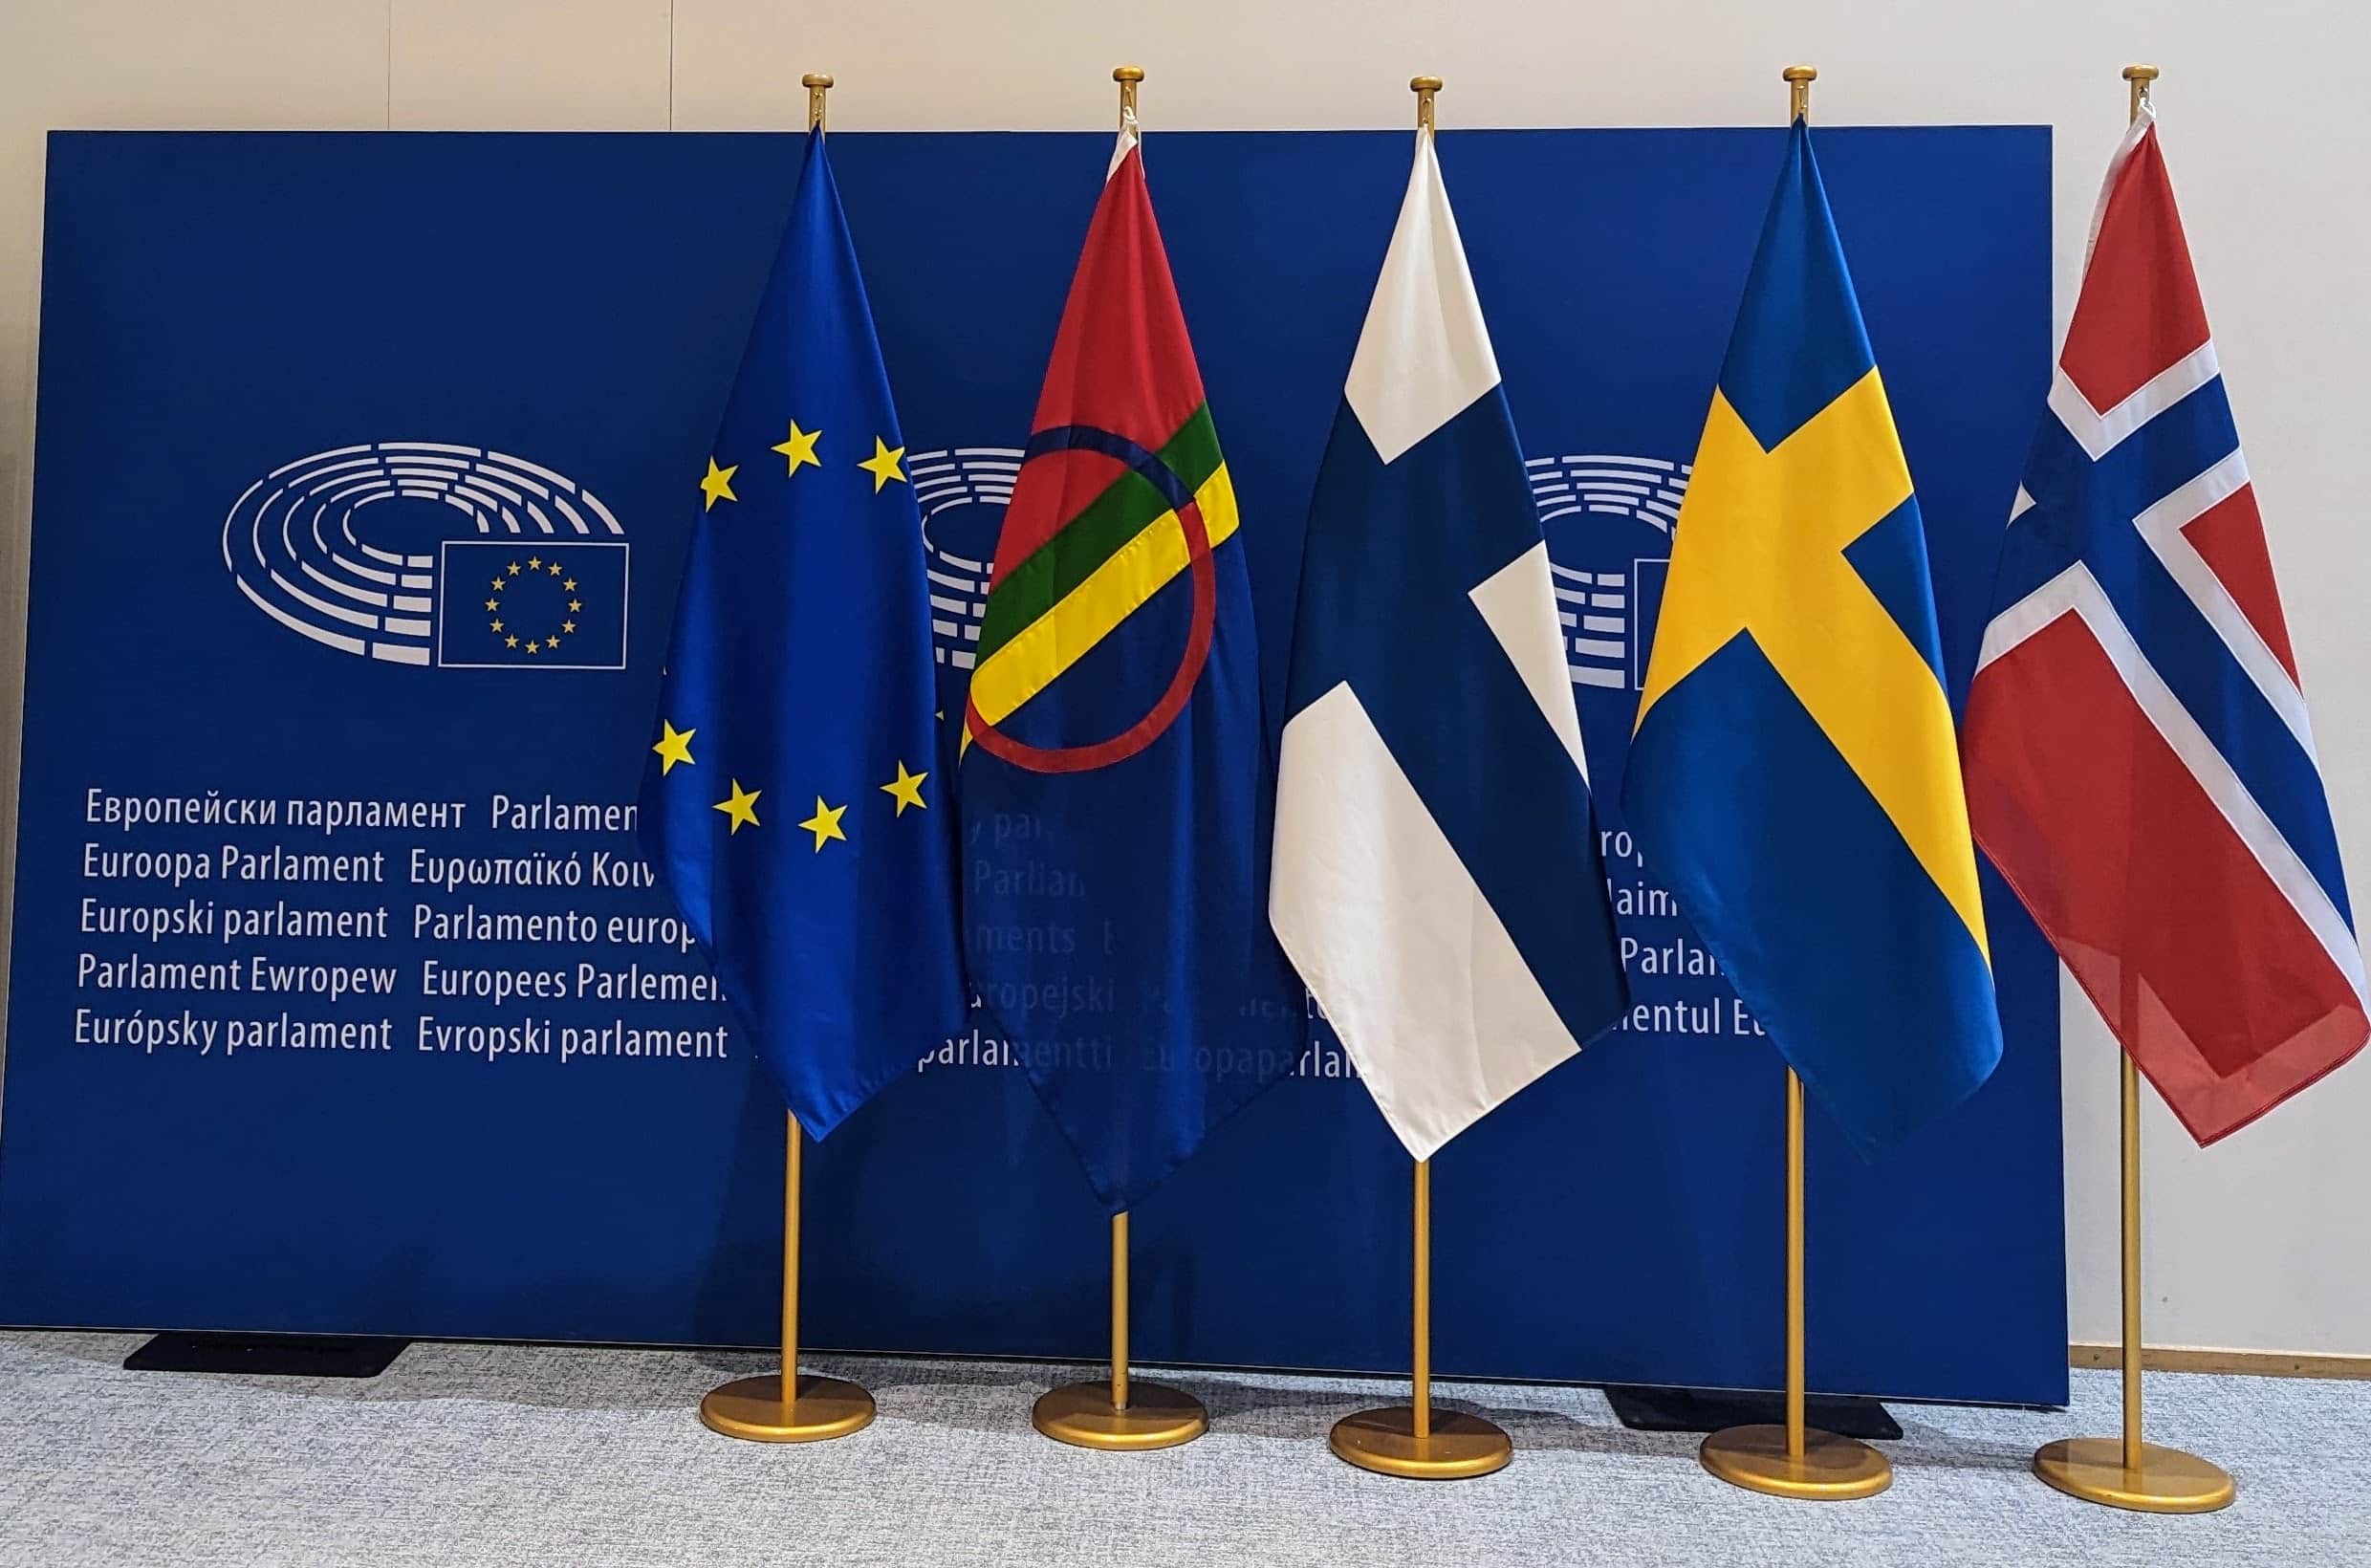 Flags of the European Union, Sápmi/Sami people, Finland, Sweden and Norway in front of European Parliament background logo